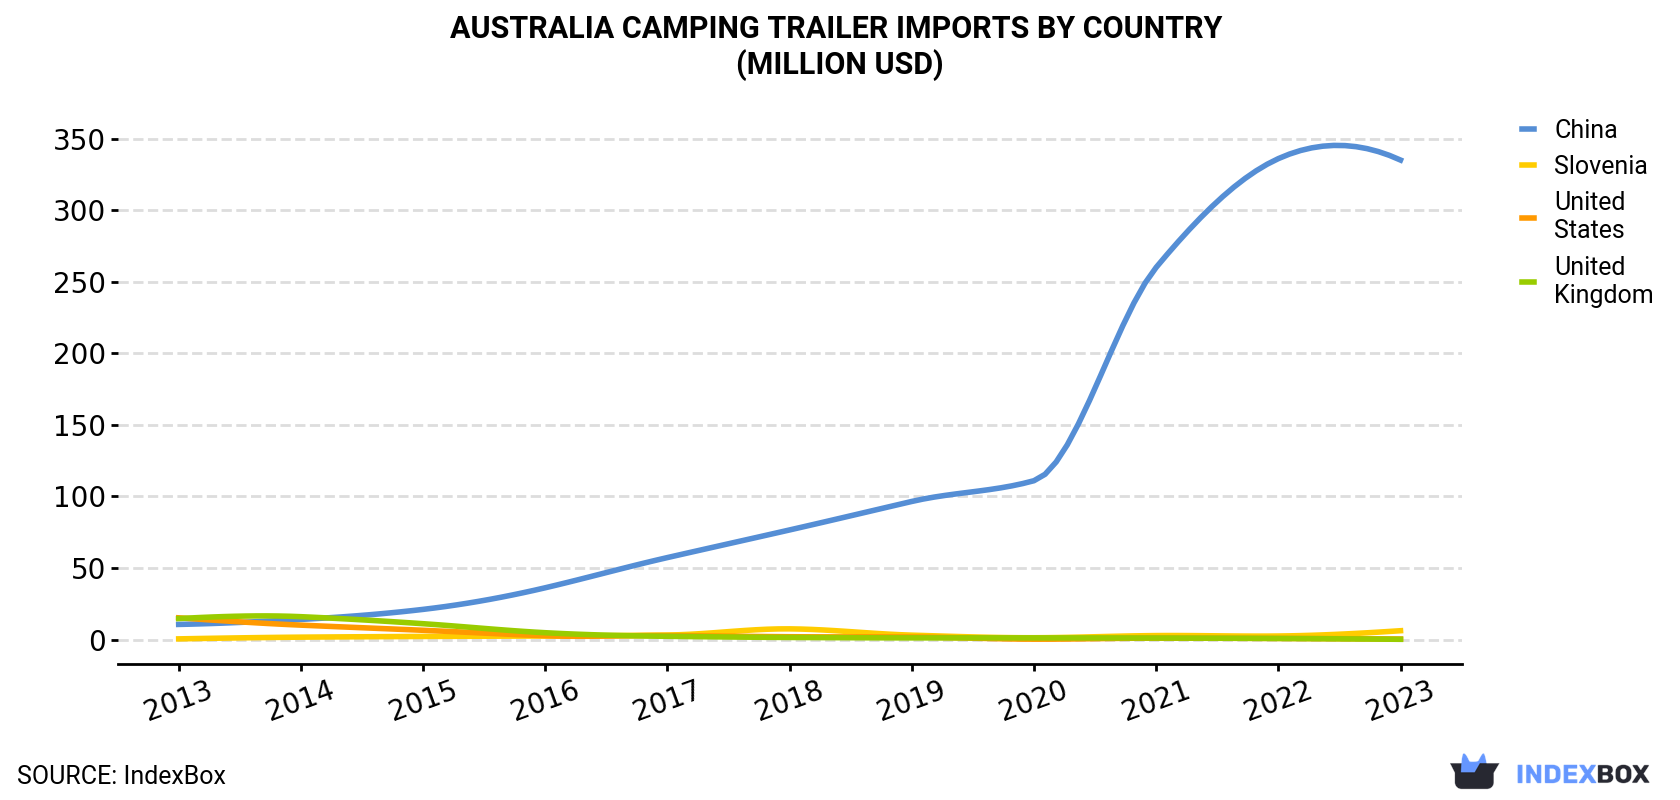 Australia Camping Trailer Imports By Country (Million USD)